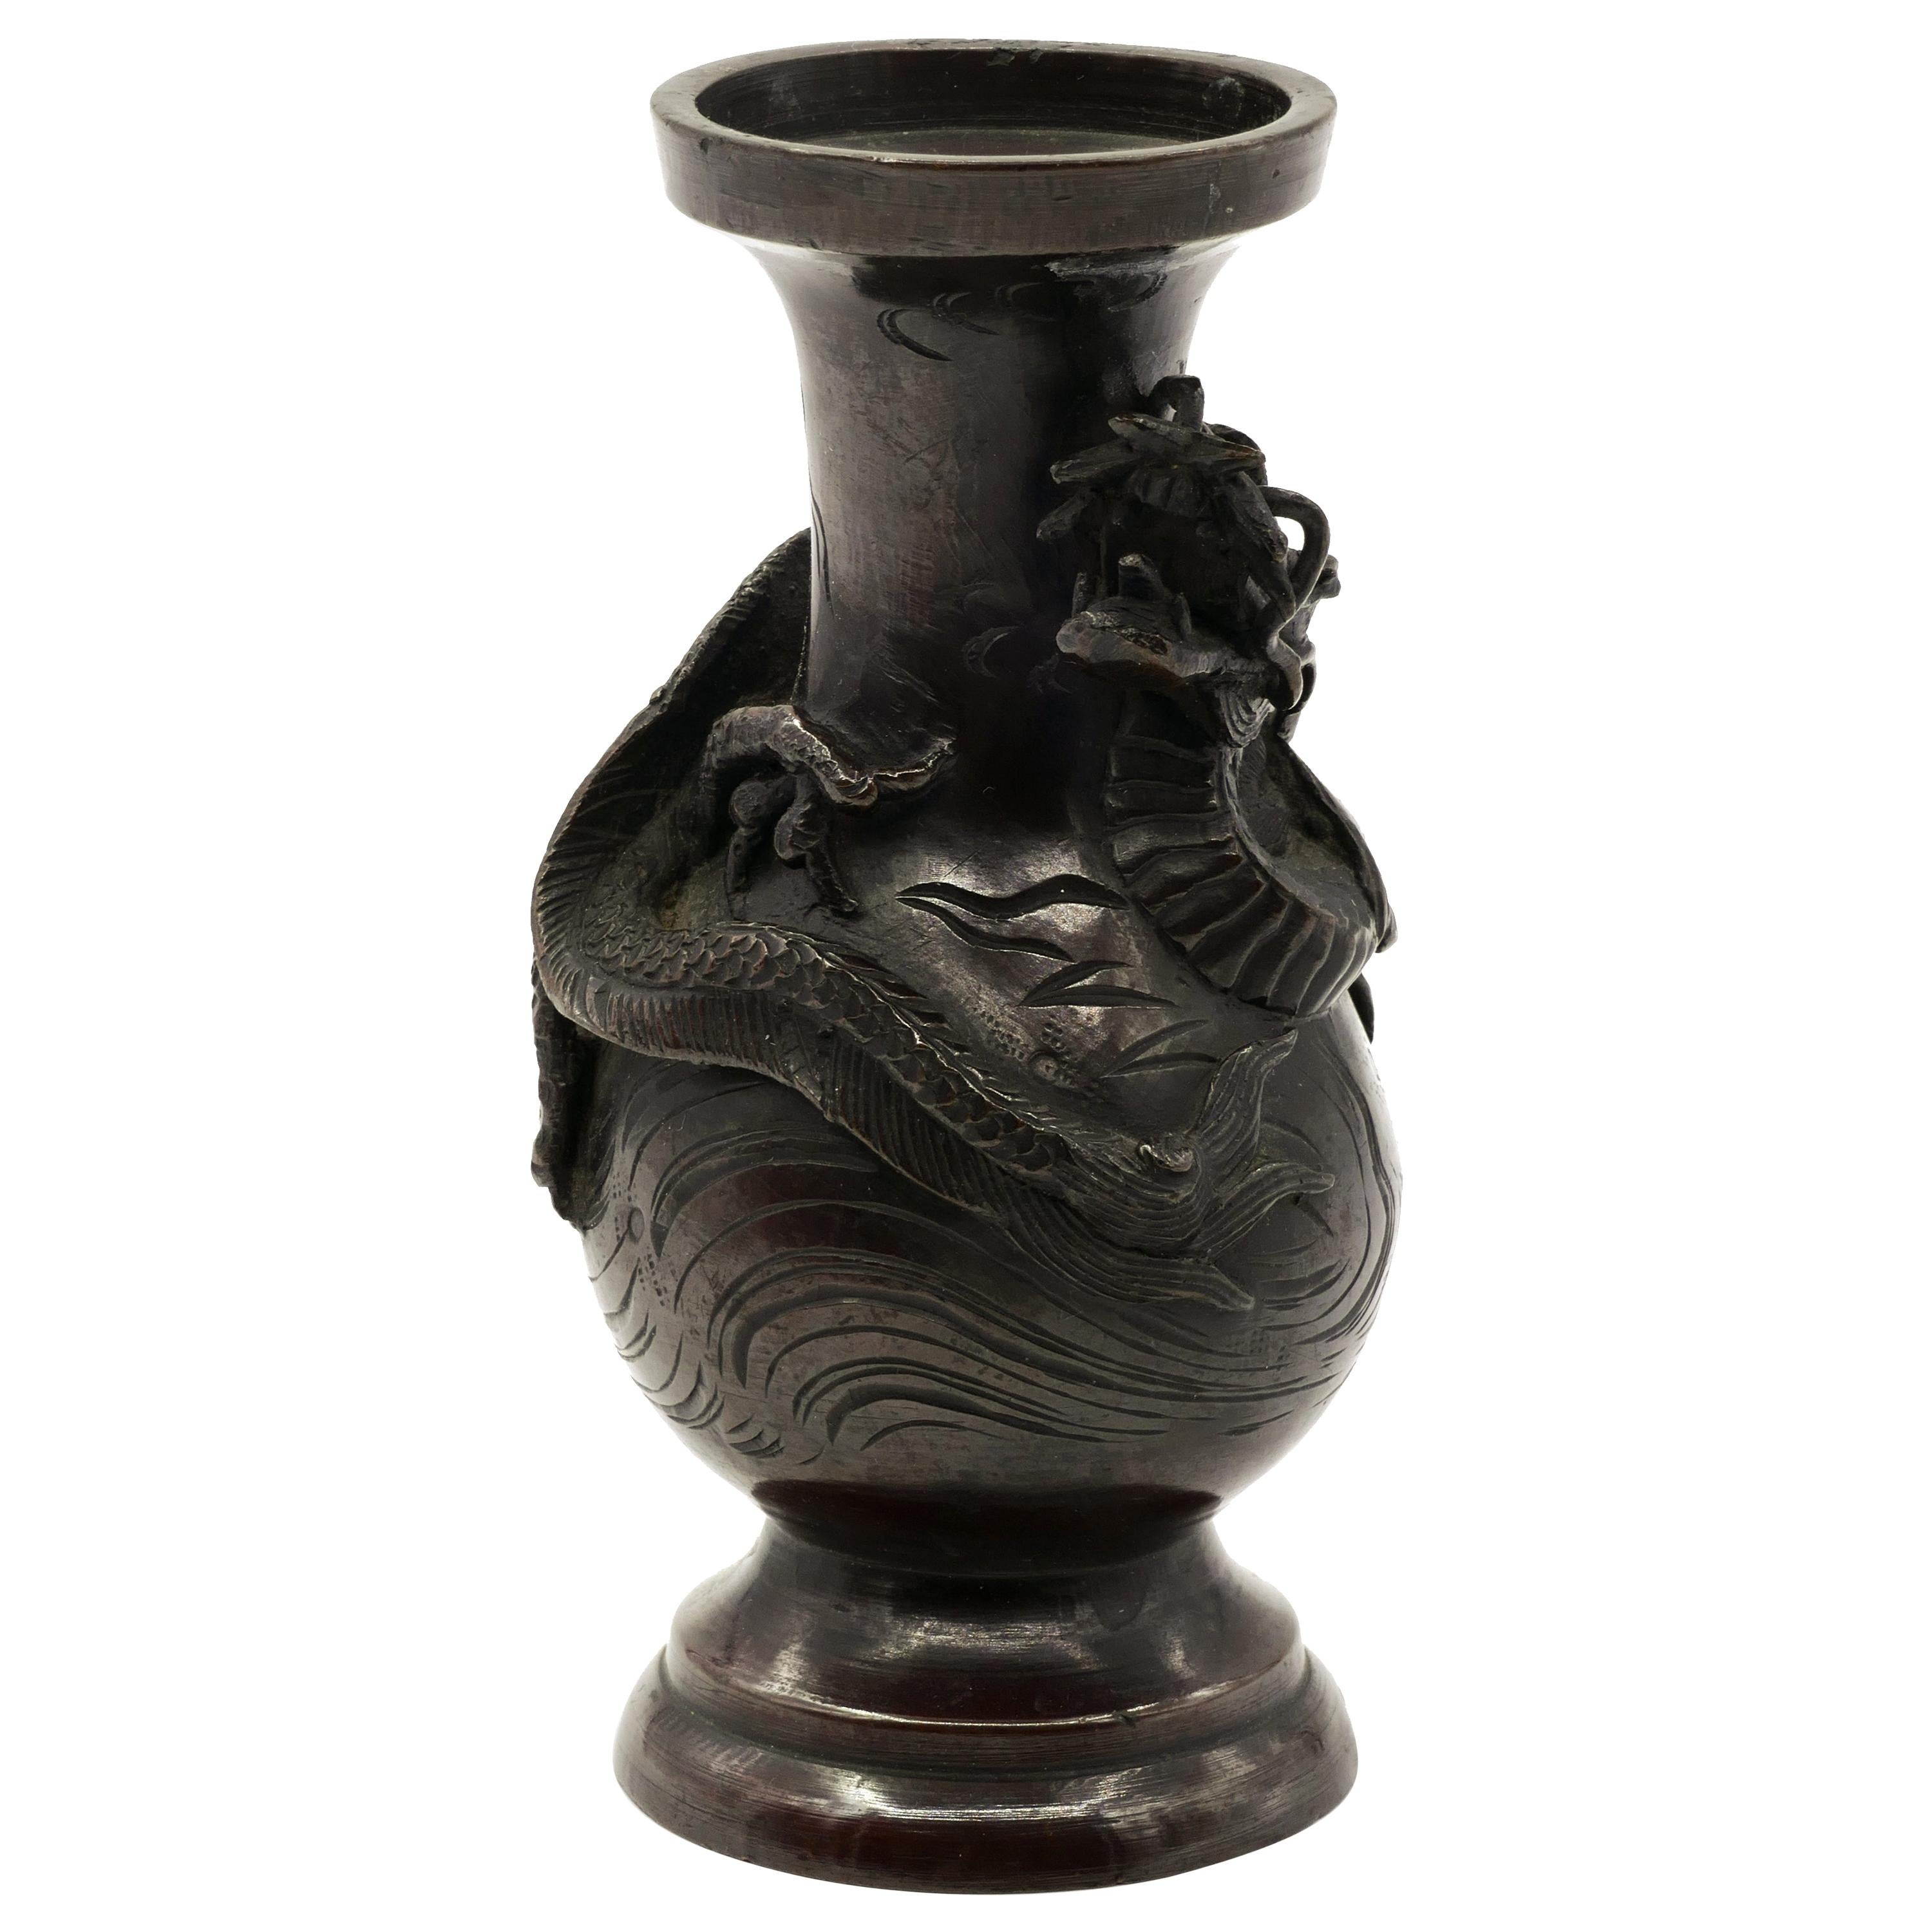 Vintage Chinese Bronze Vase with Dragon, Early 20th Century